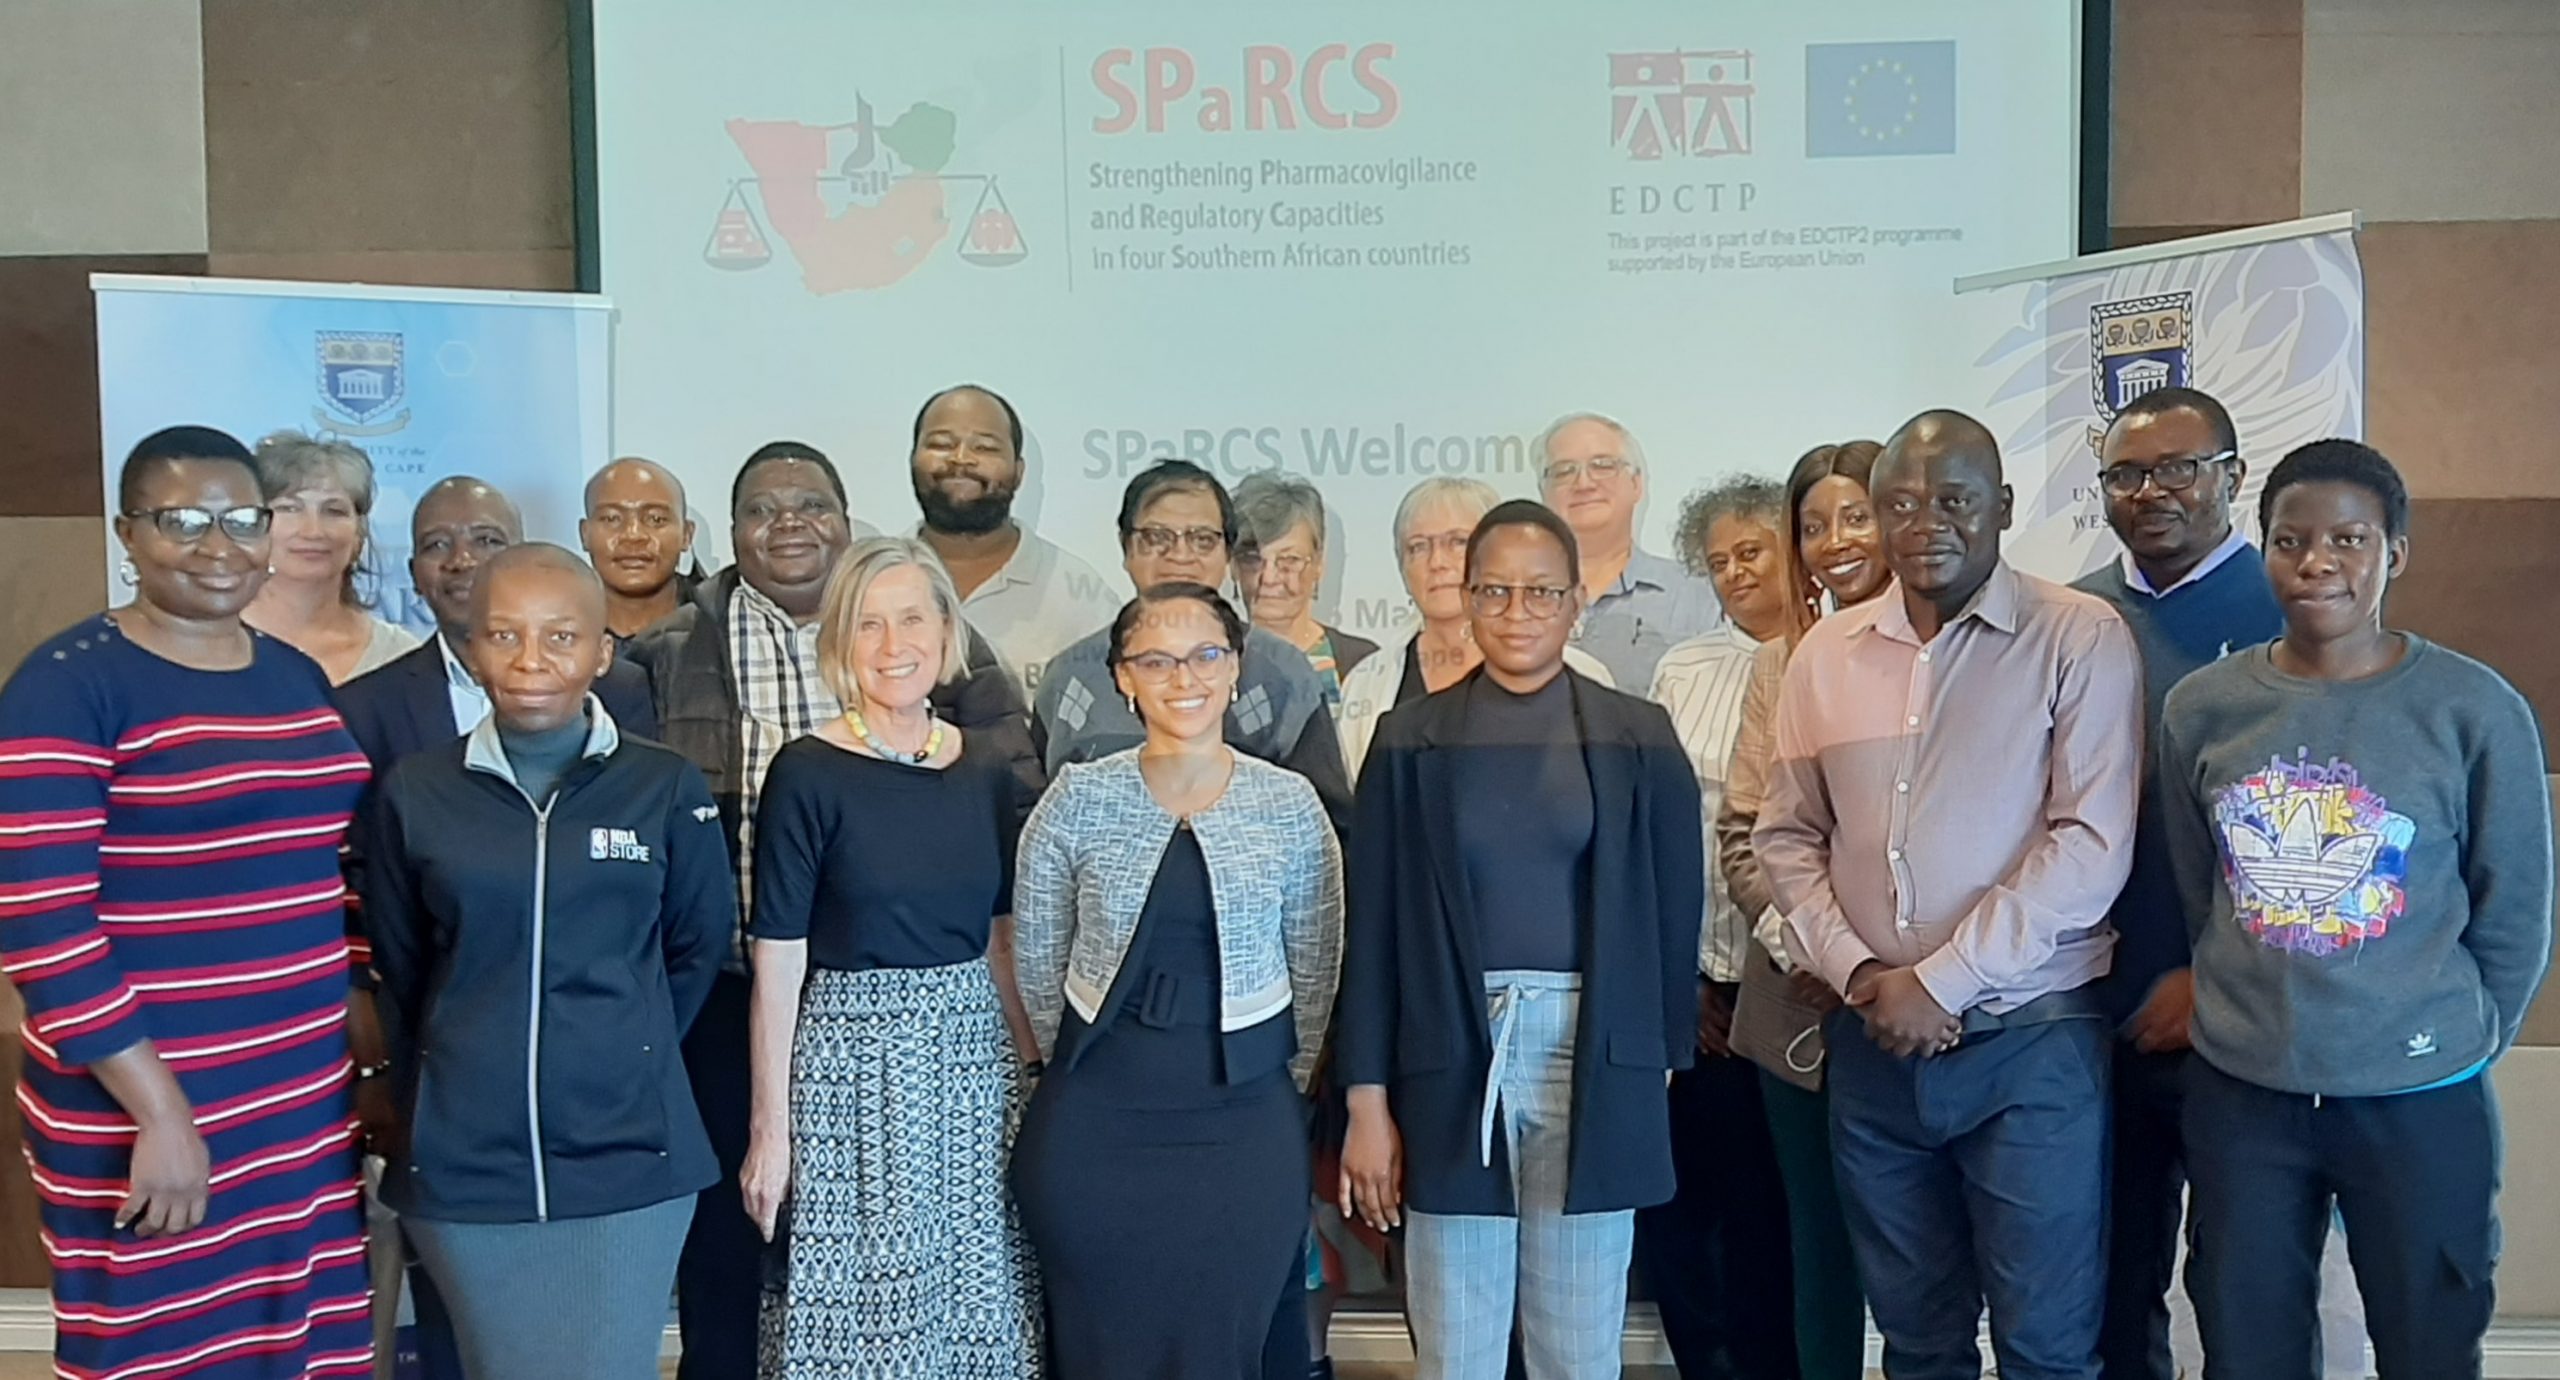 After almost 2 years working together, the SPaRCS team finally met for our first in-person meeting in Cape Town in March 2022